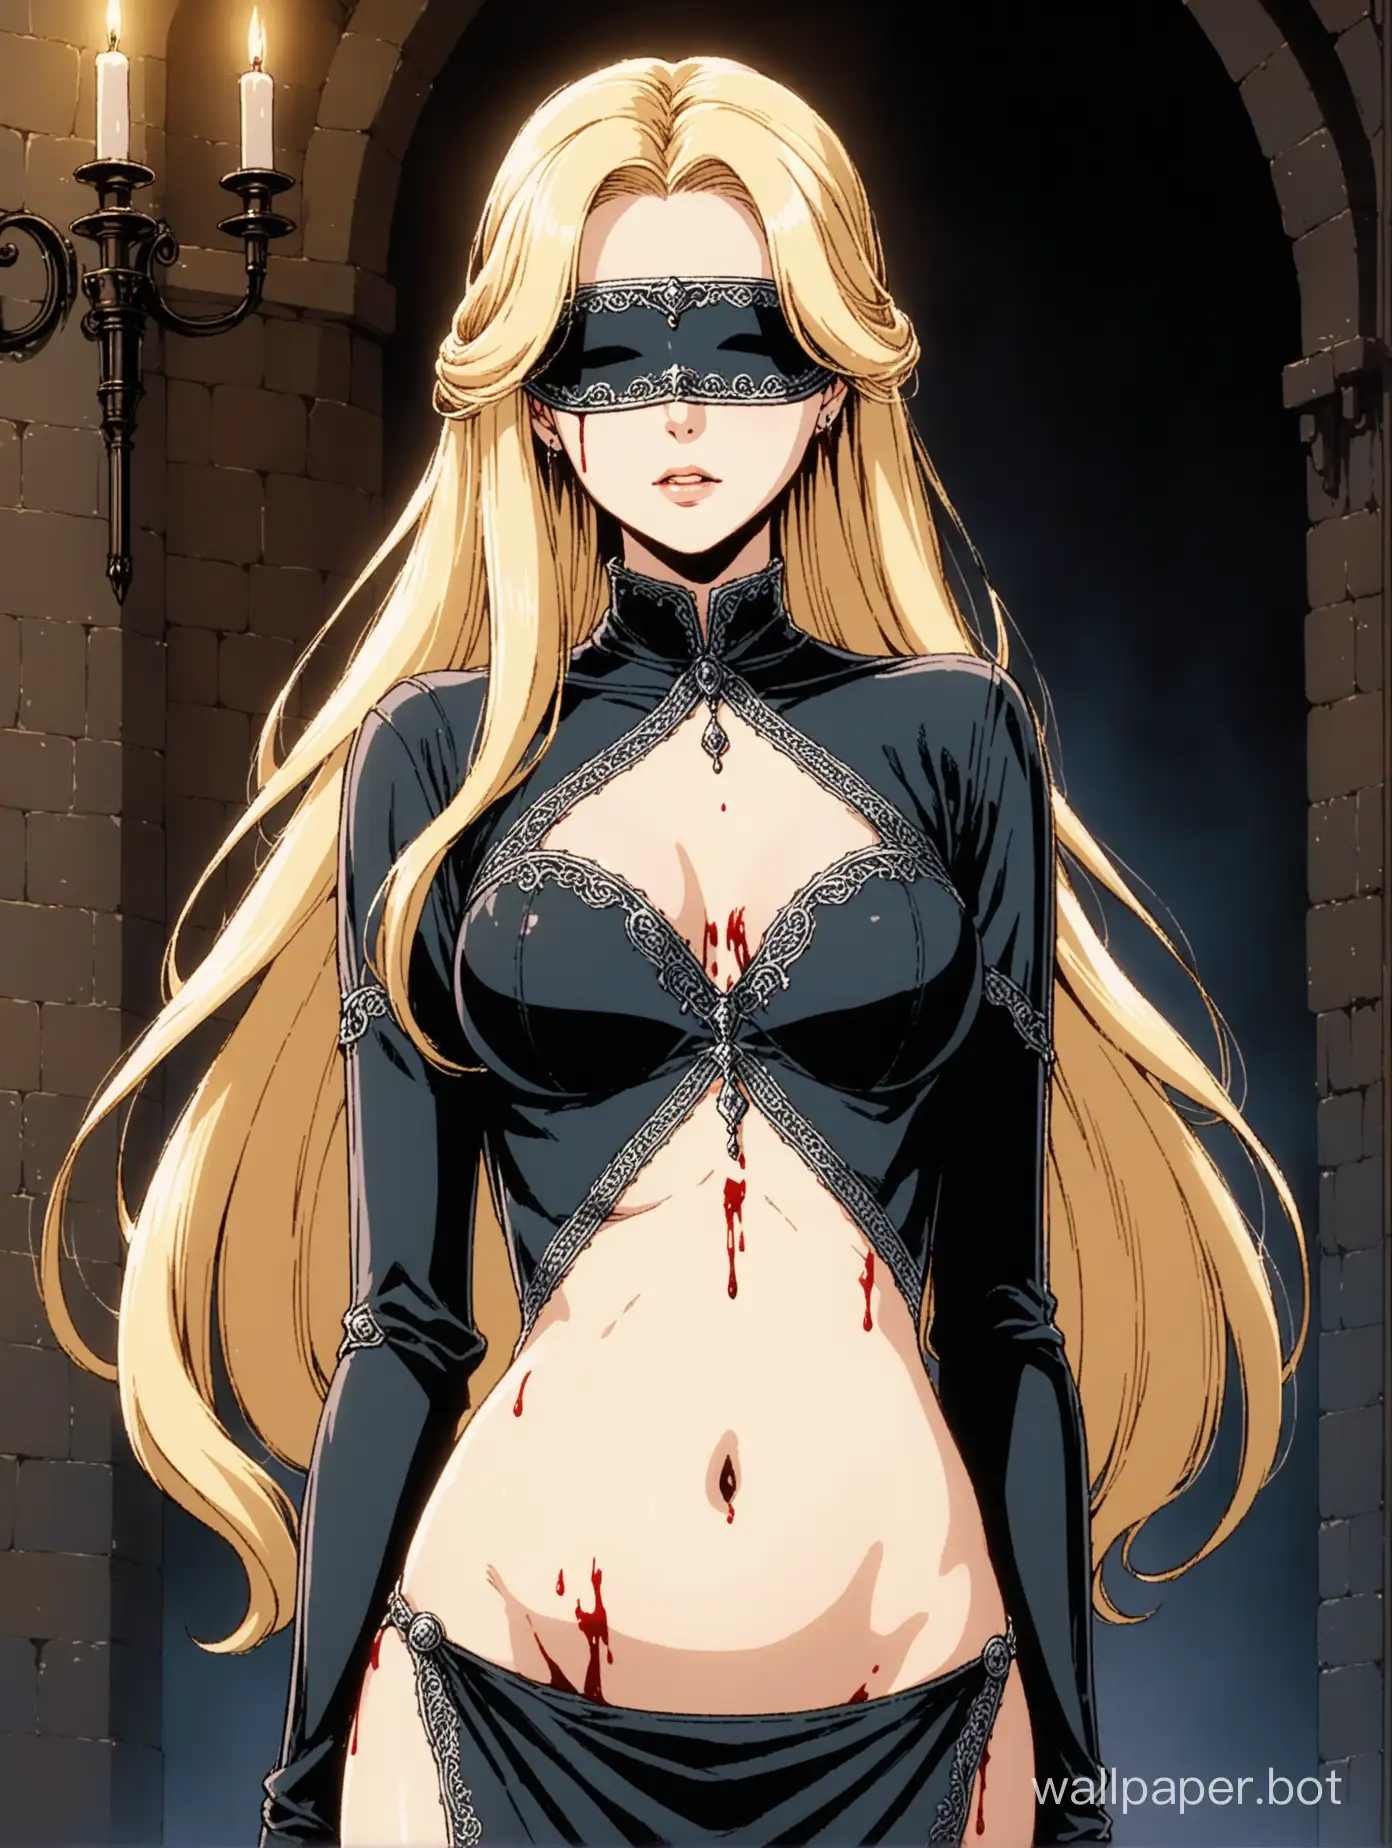 a young and attractive white woman, she has long wavy white-blonde hair, standing regally, elegant and slender, thin sharp face, wearing an ornate metal blindfold, bleeding from underneath her blindfold, blood dripping down her cheeks, wearing a sheer thin dark grey skintight dress, small diamond-shaped navel cutout, her stomach is exposed, wearing a navel piercing, decorative stitching, medieval elegance, 1980s retro anime